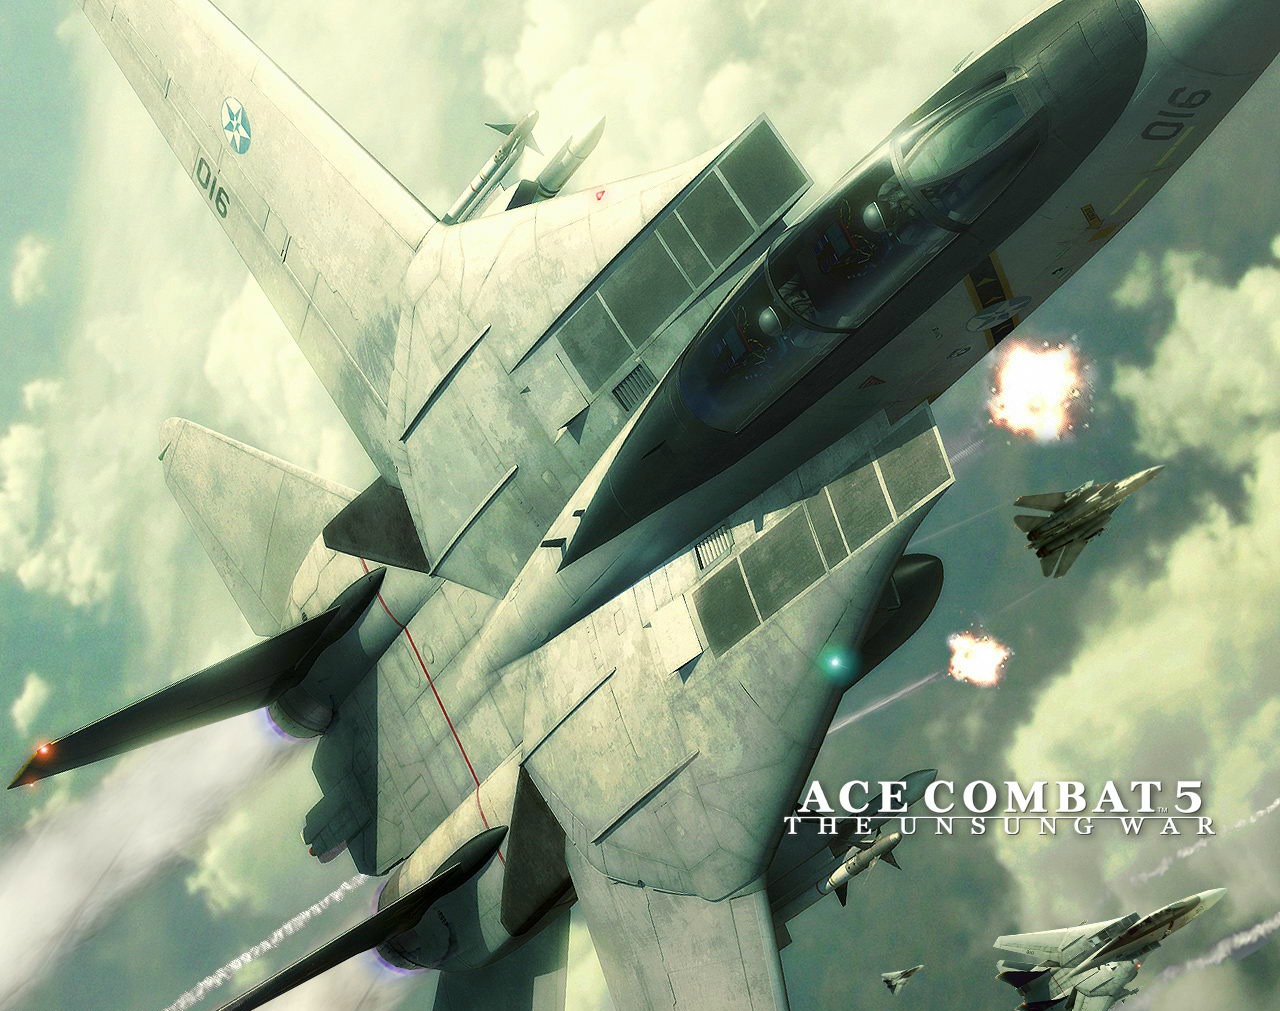 video game, ace combat 5: the unsung war